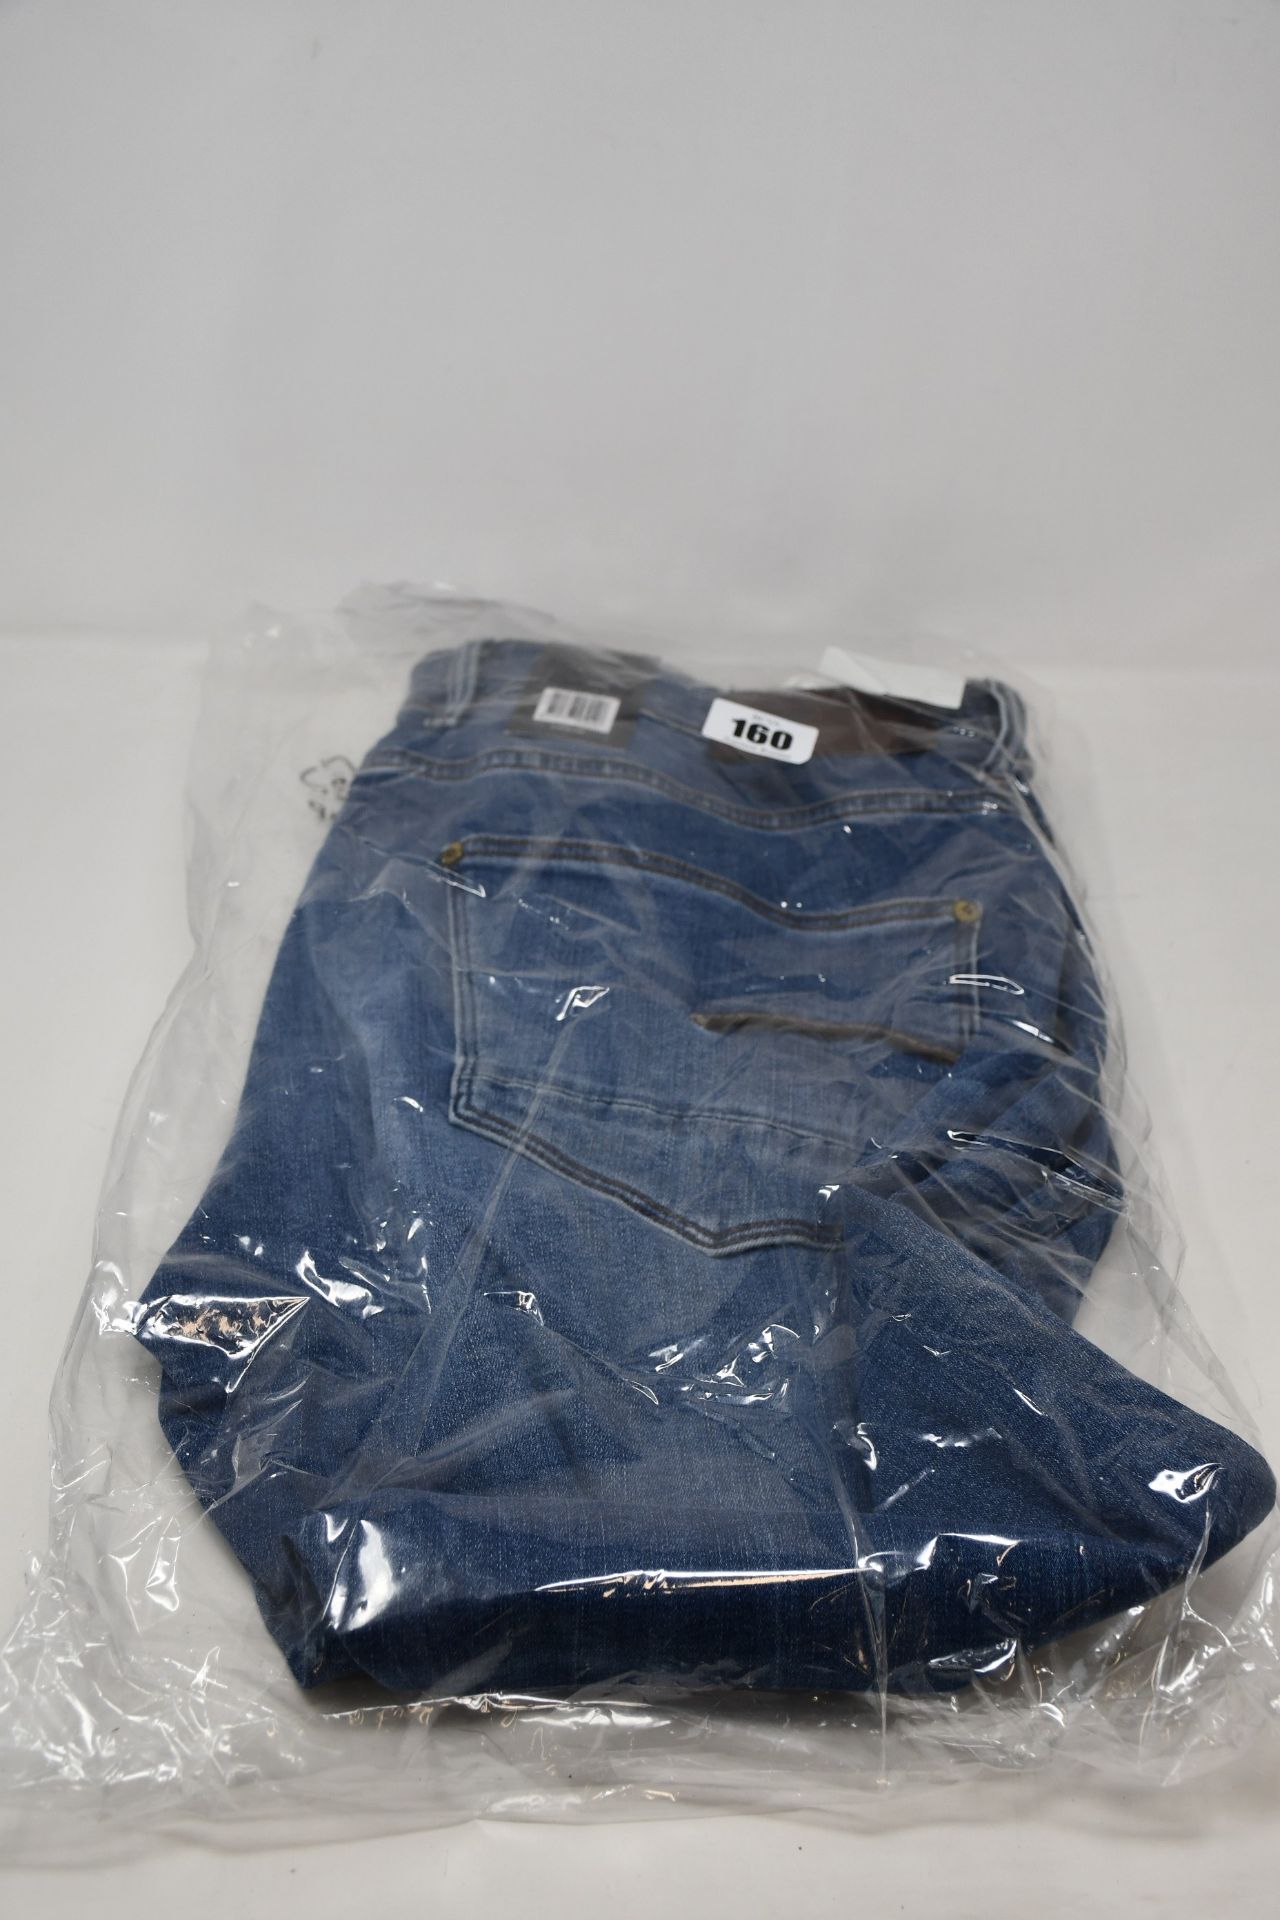 Four pairs of as new G-Star Raw jeans (All size 40).